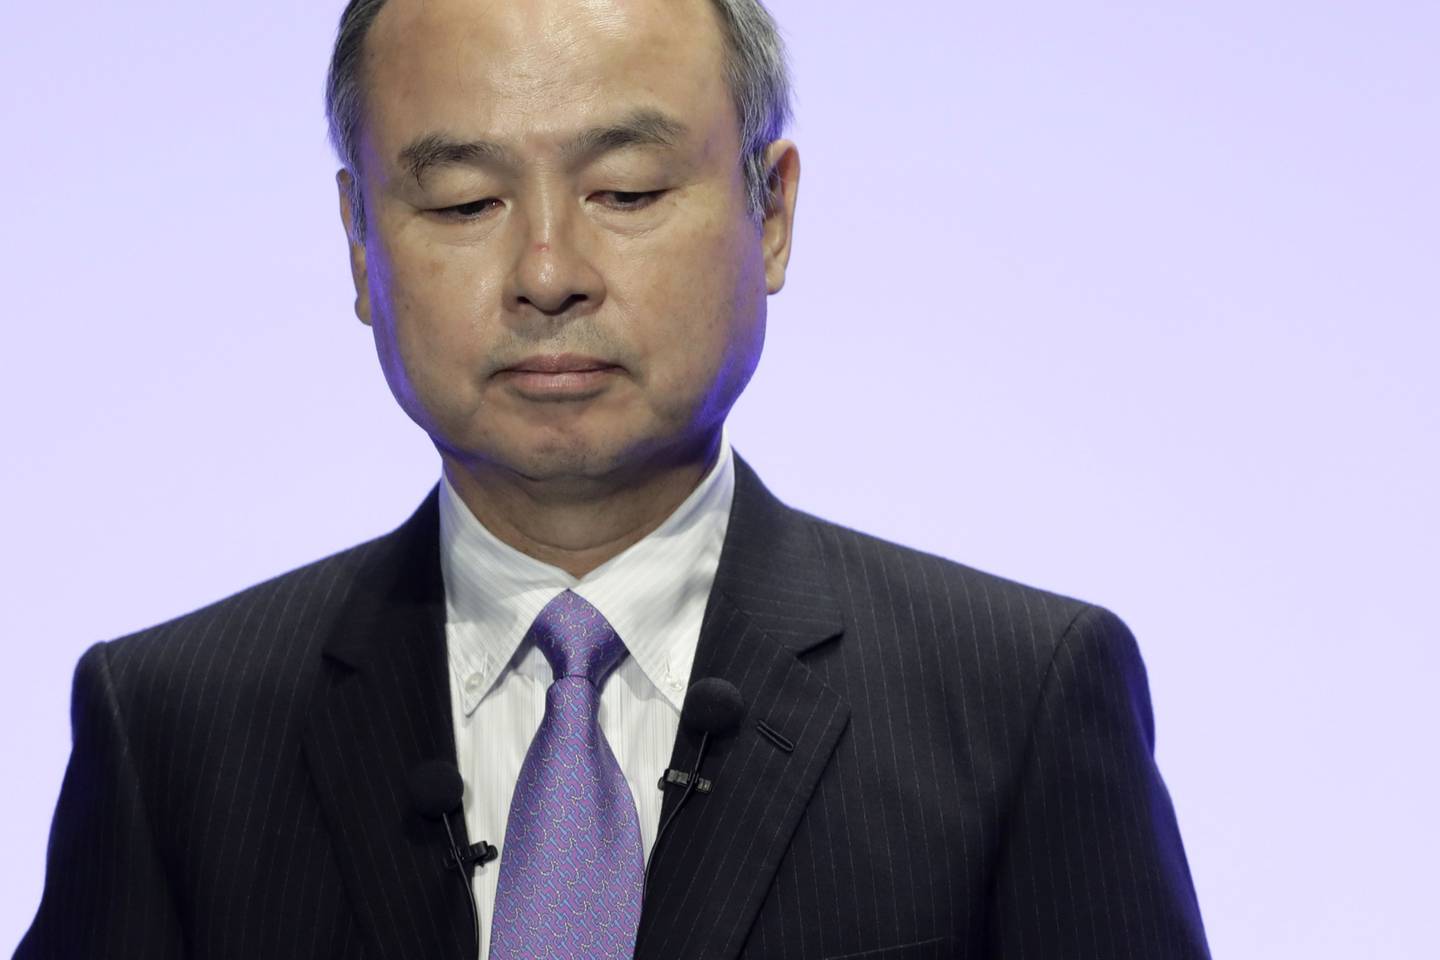 Masayoshi Son, chairman and chief executive officer of SoftBank Group Corp., delivers a keynote speech at the Junior Chamber International (JCI) World Congress in Yokohama, Japan, on Wednesday, Nov. 4, 2020.